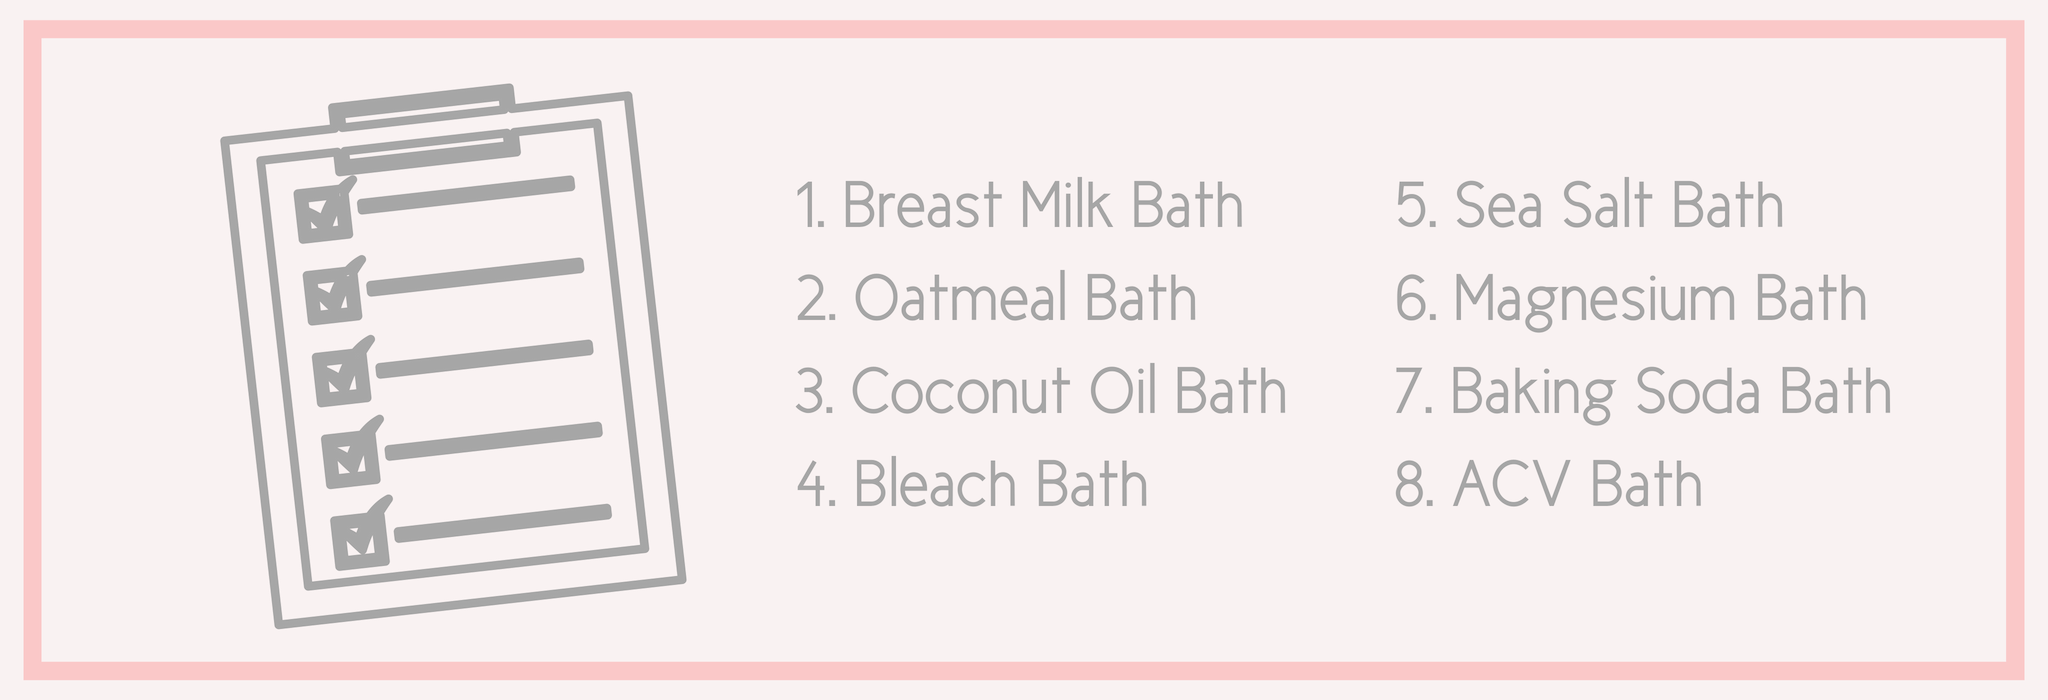 8-soothing-baths-for-baby-eczema-relief